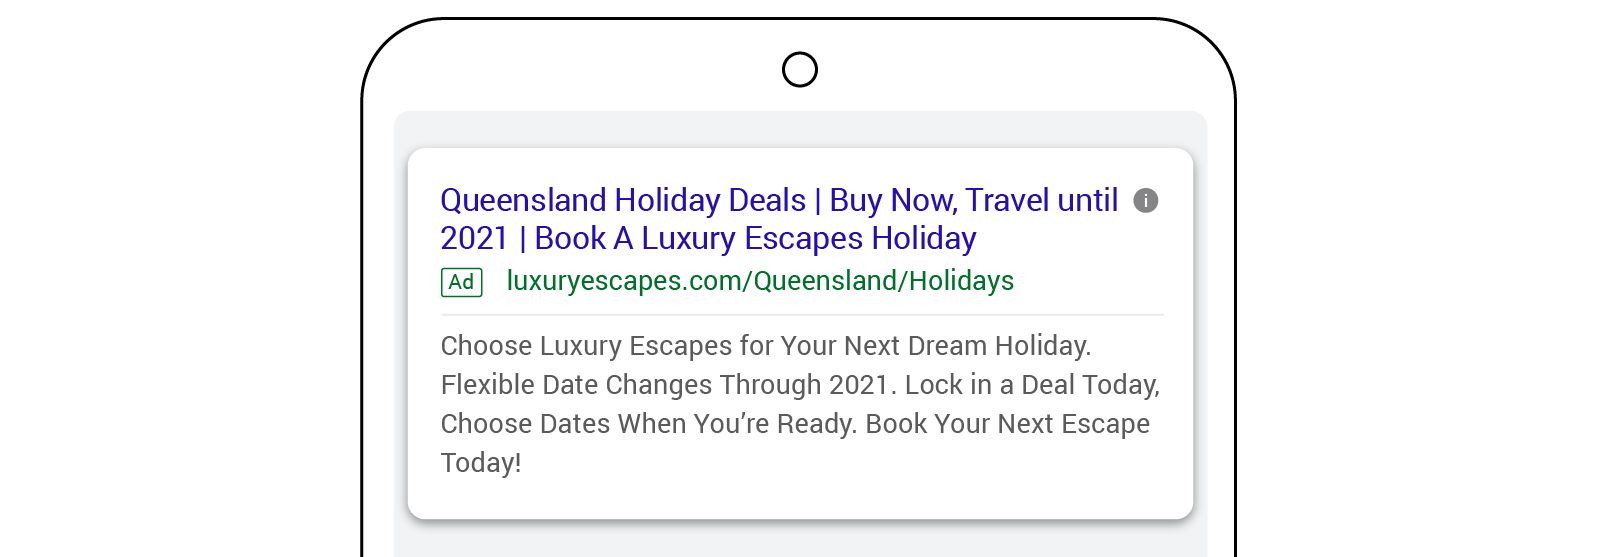 Luxury Escapes Dynamic Search Ads - Top4 Marketing